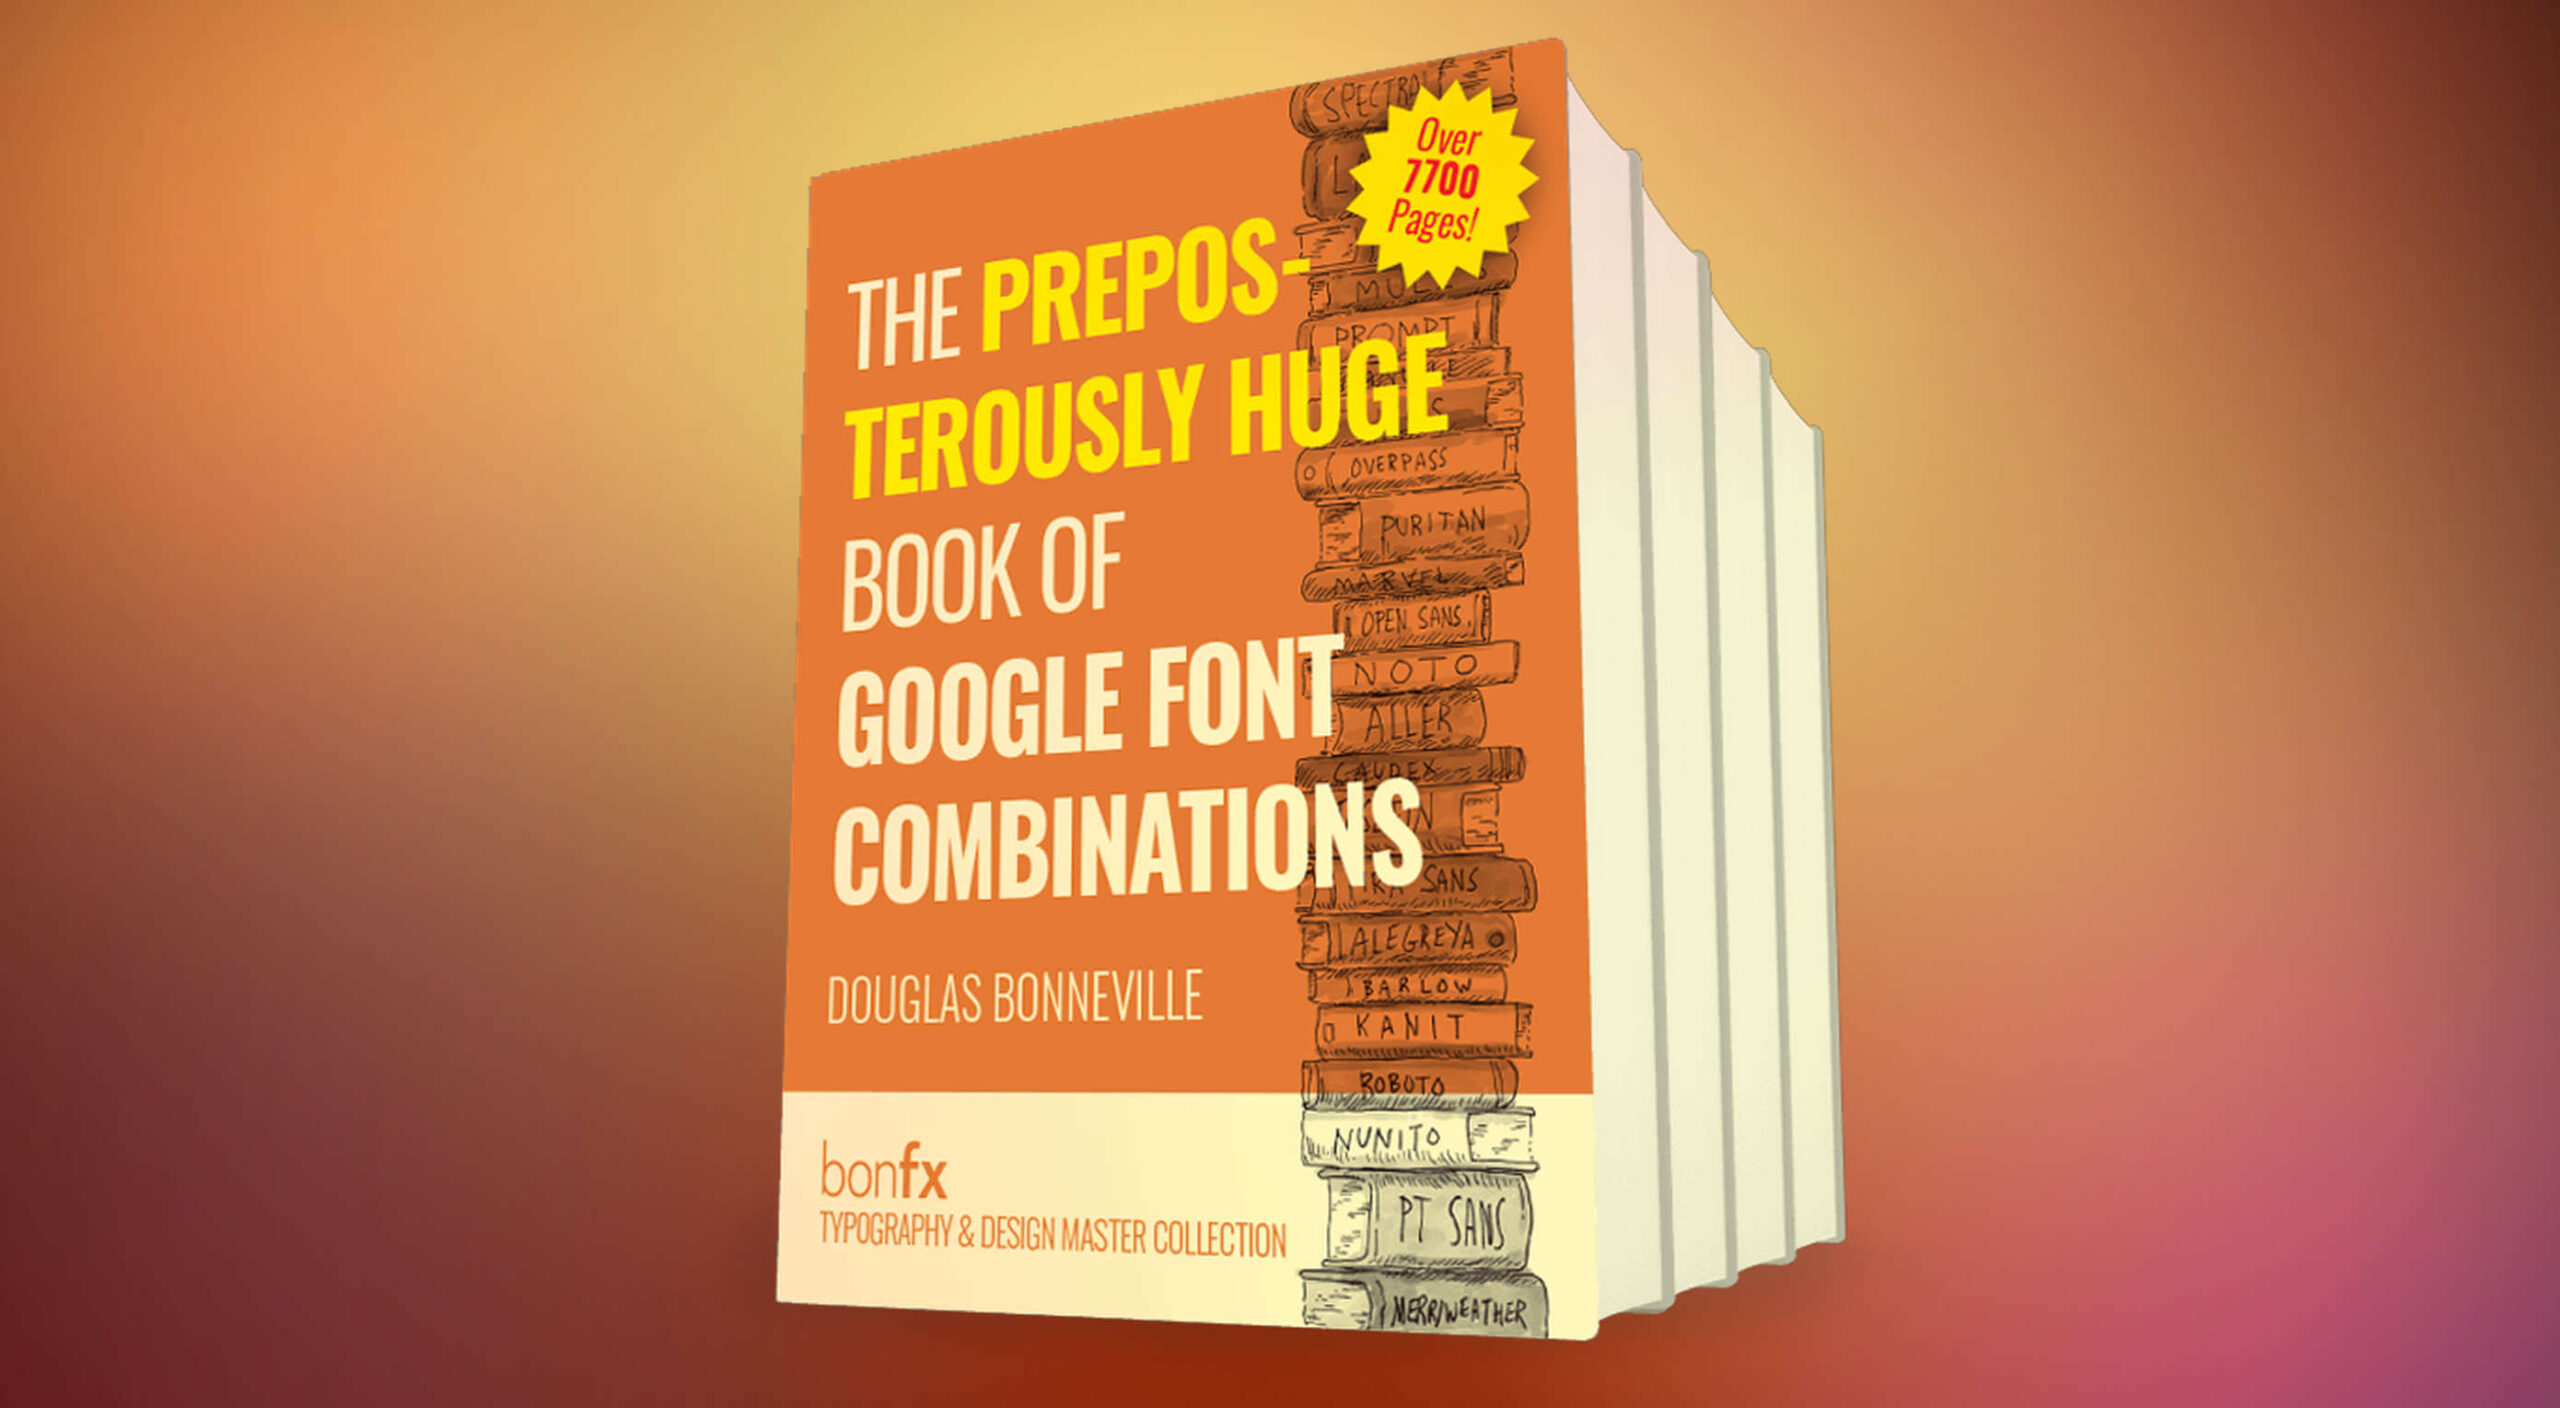 Deal: The Preposterously Huge Book of Google Font Combinations